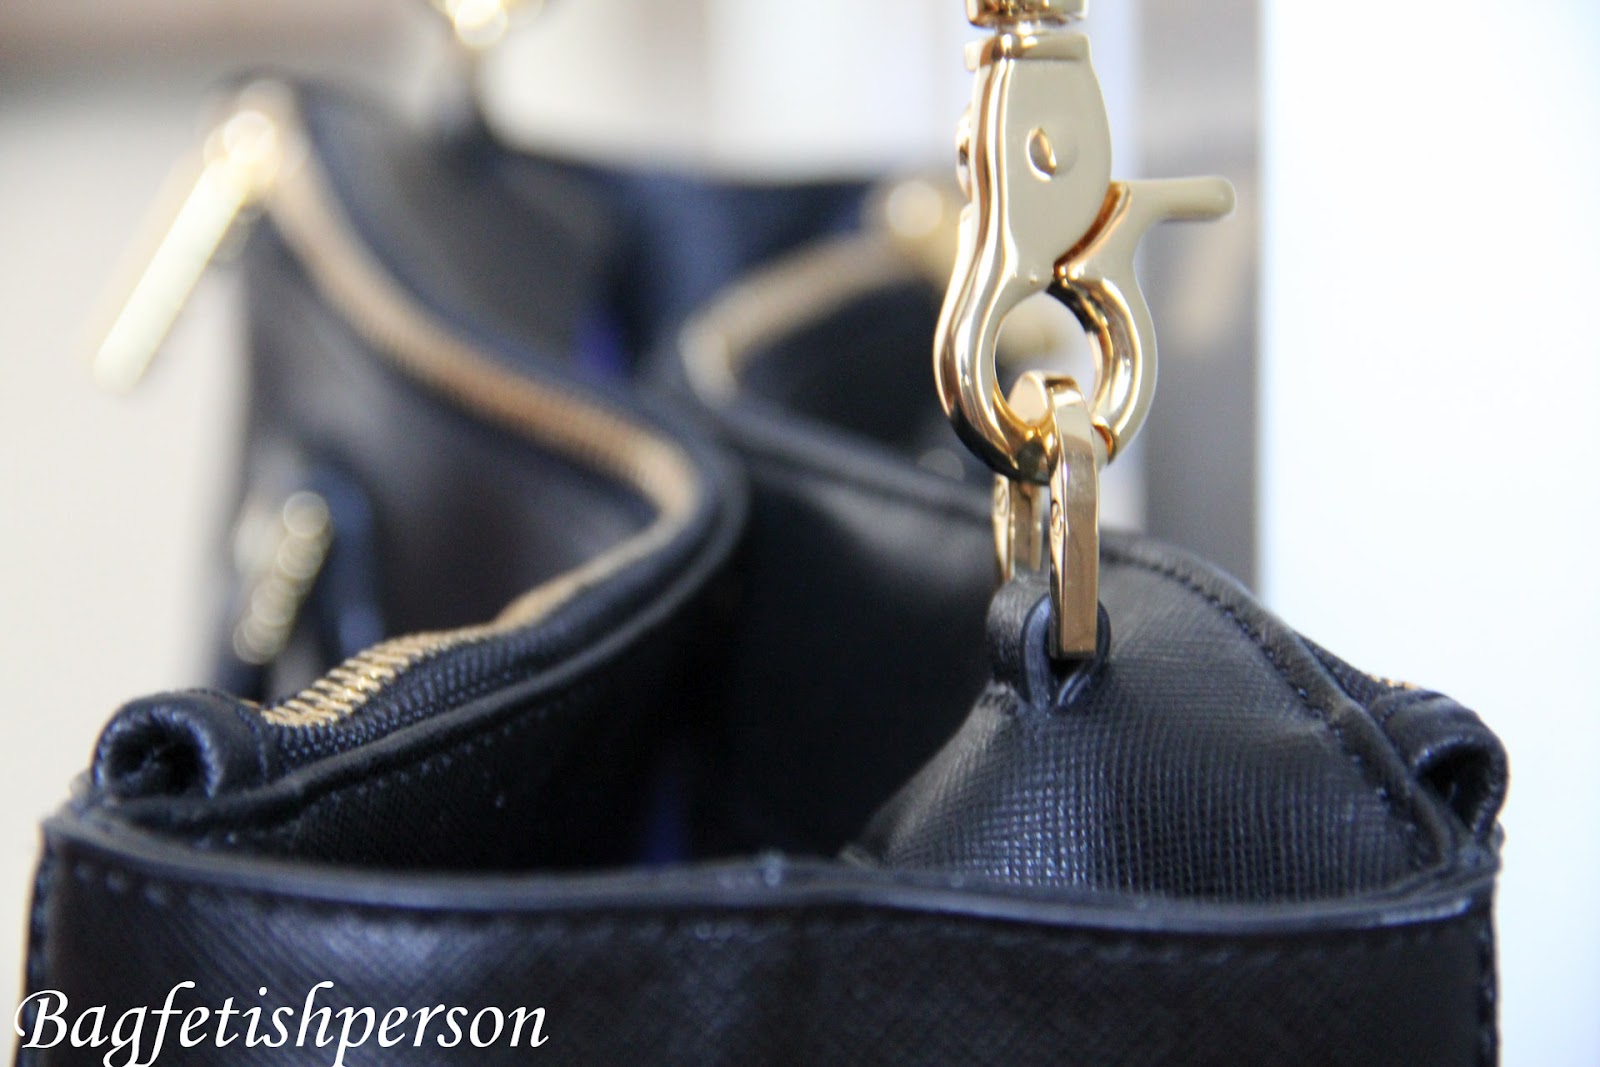 What's in my bag? Tory Burch Robinson Double Zip Tote 